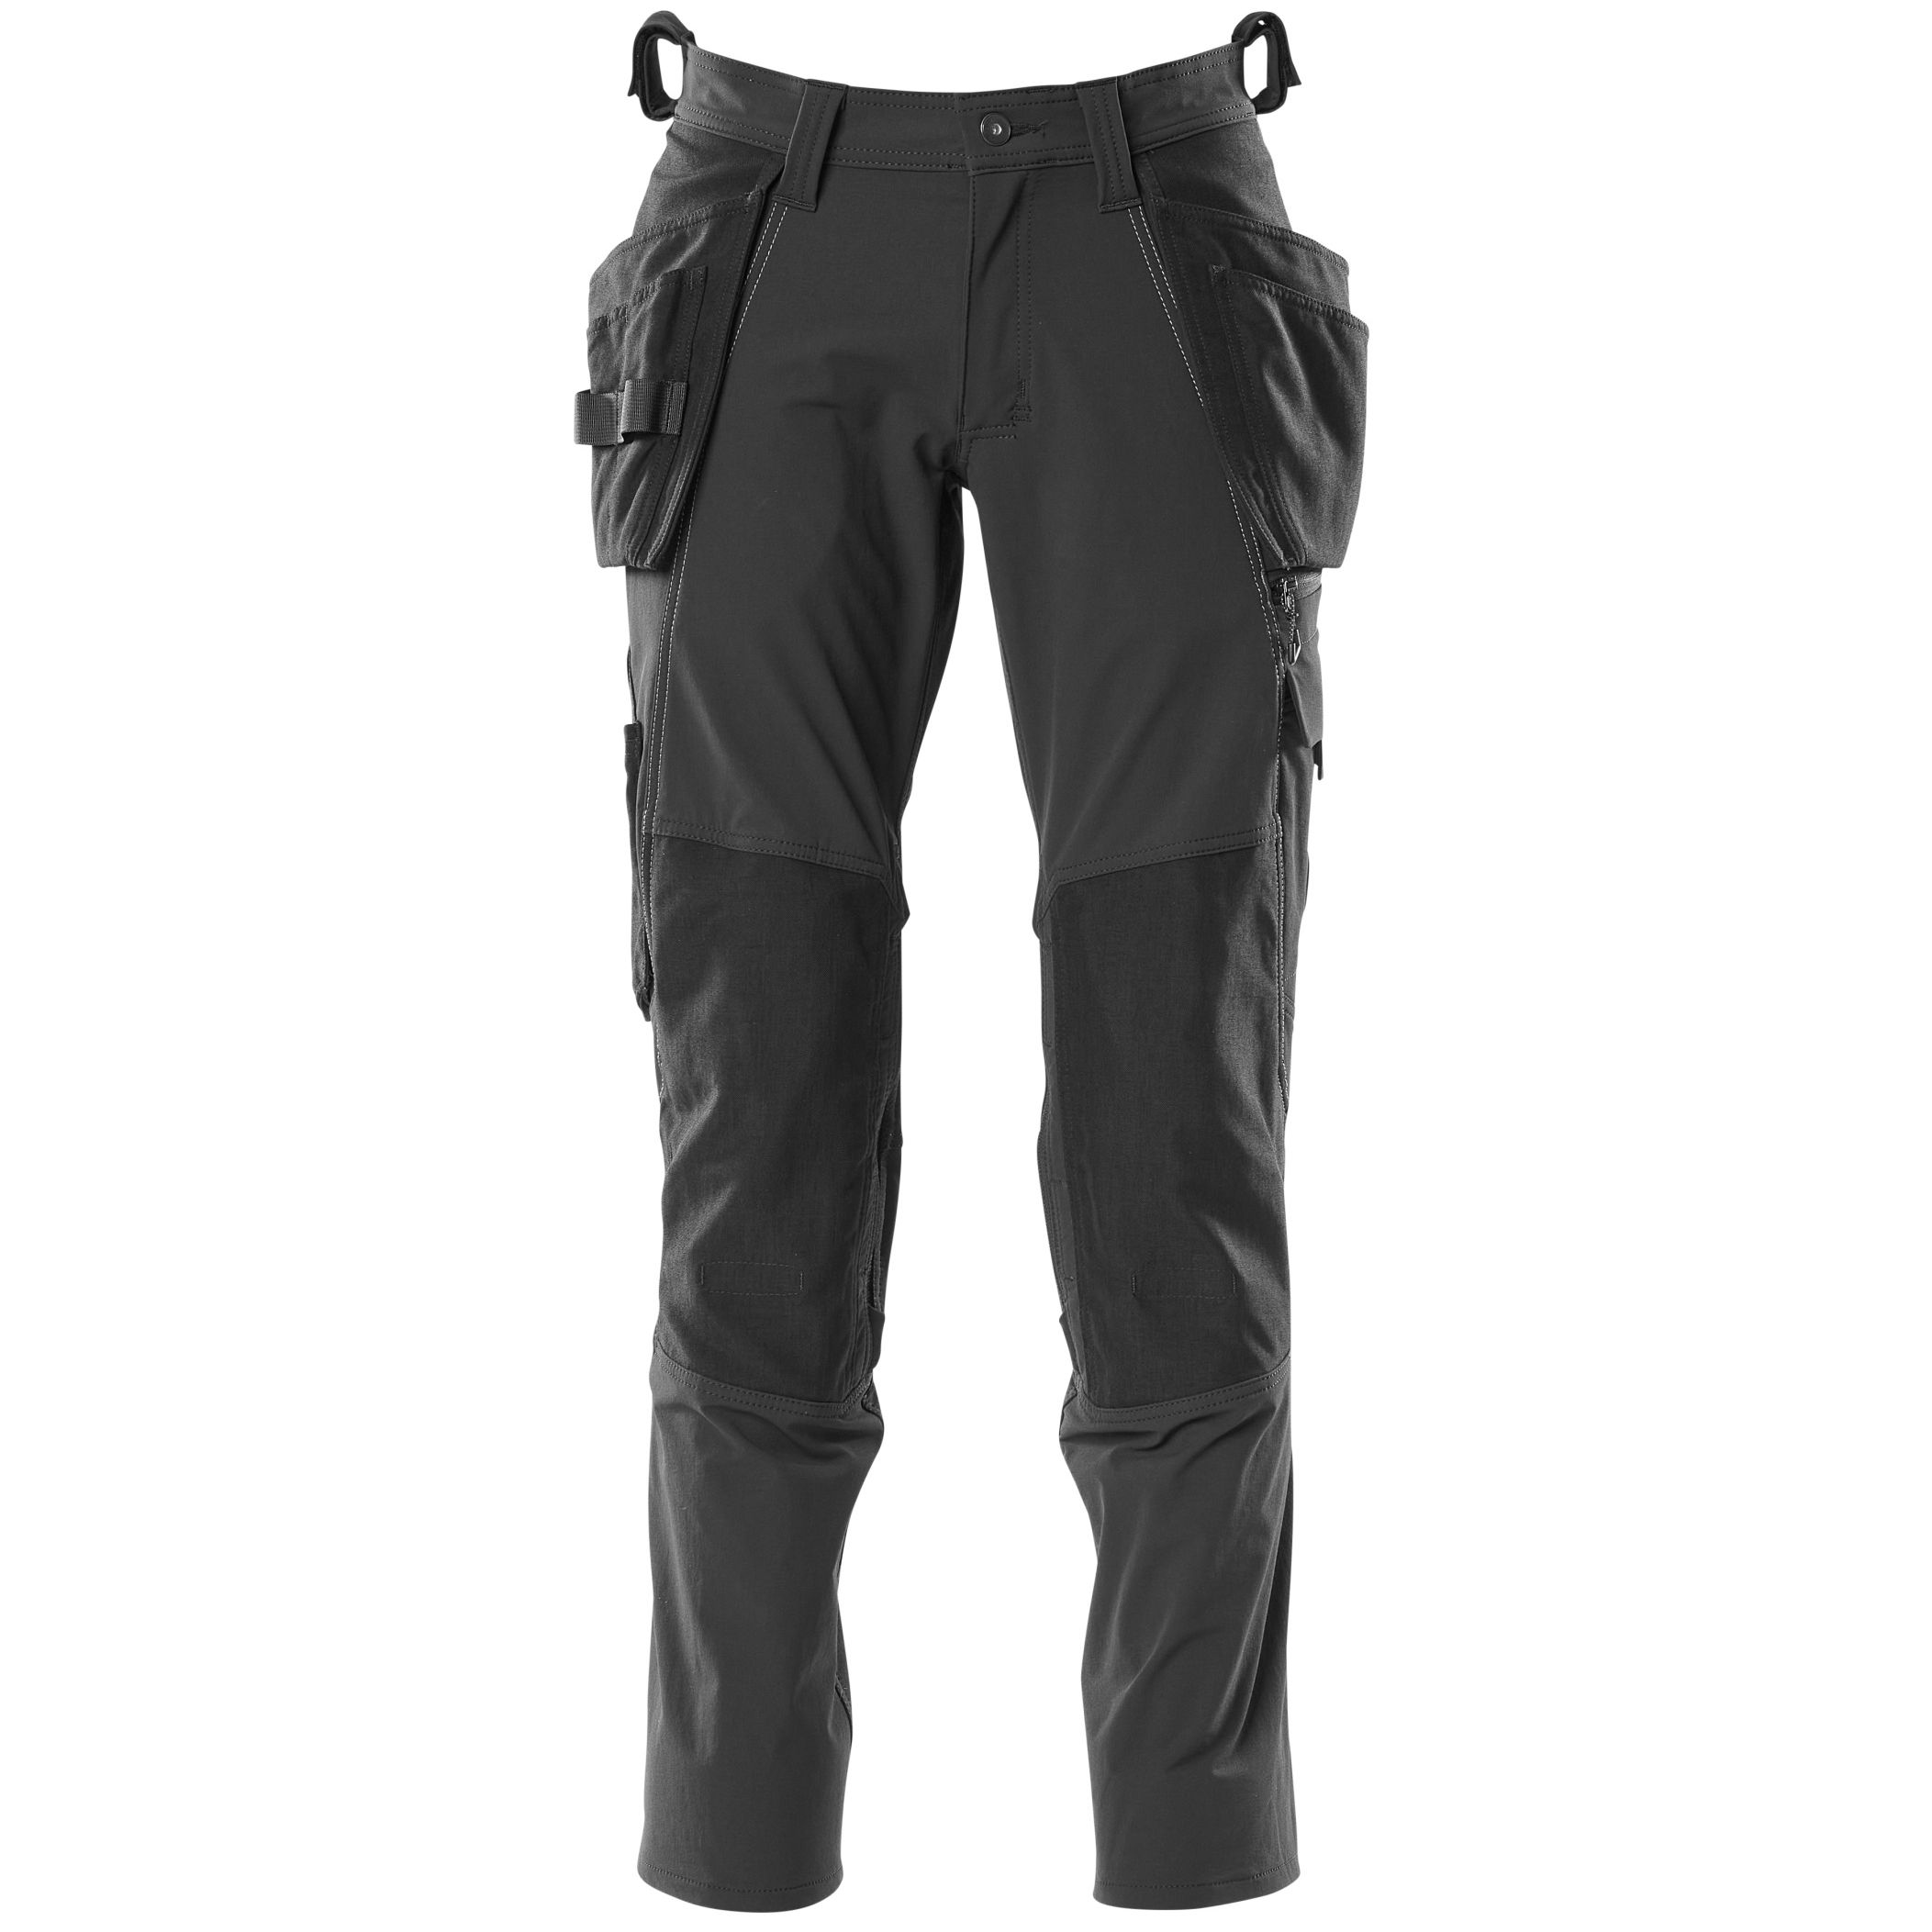 Mascot Lightweight Accelerate Trousers With Holster Pockets - Black